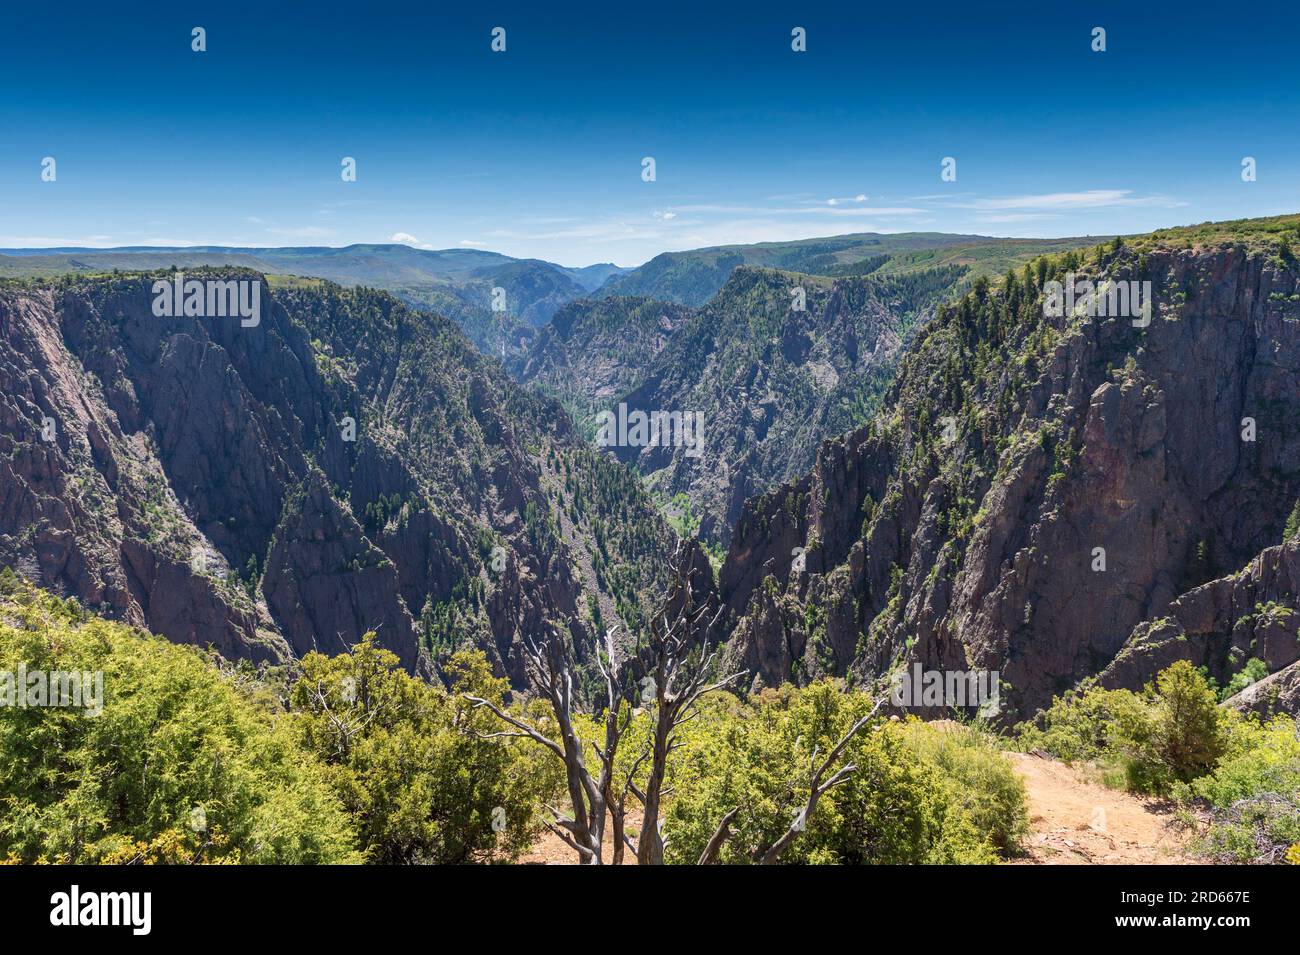 Black Canyon of the Gunnison wilderness in Colorado Stock Photo